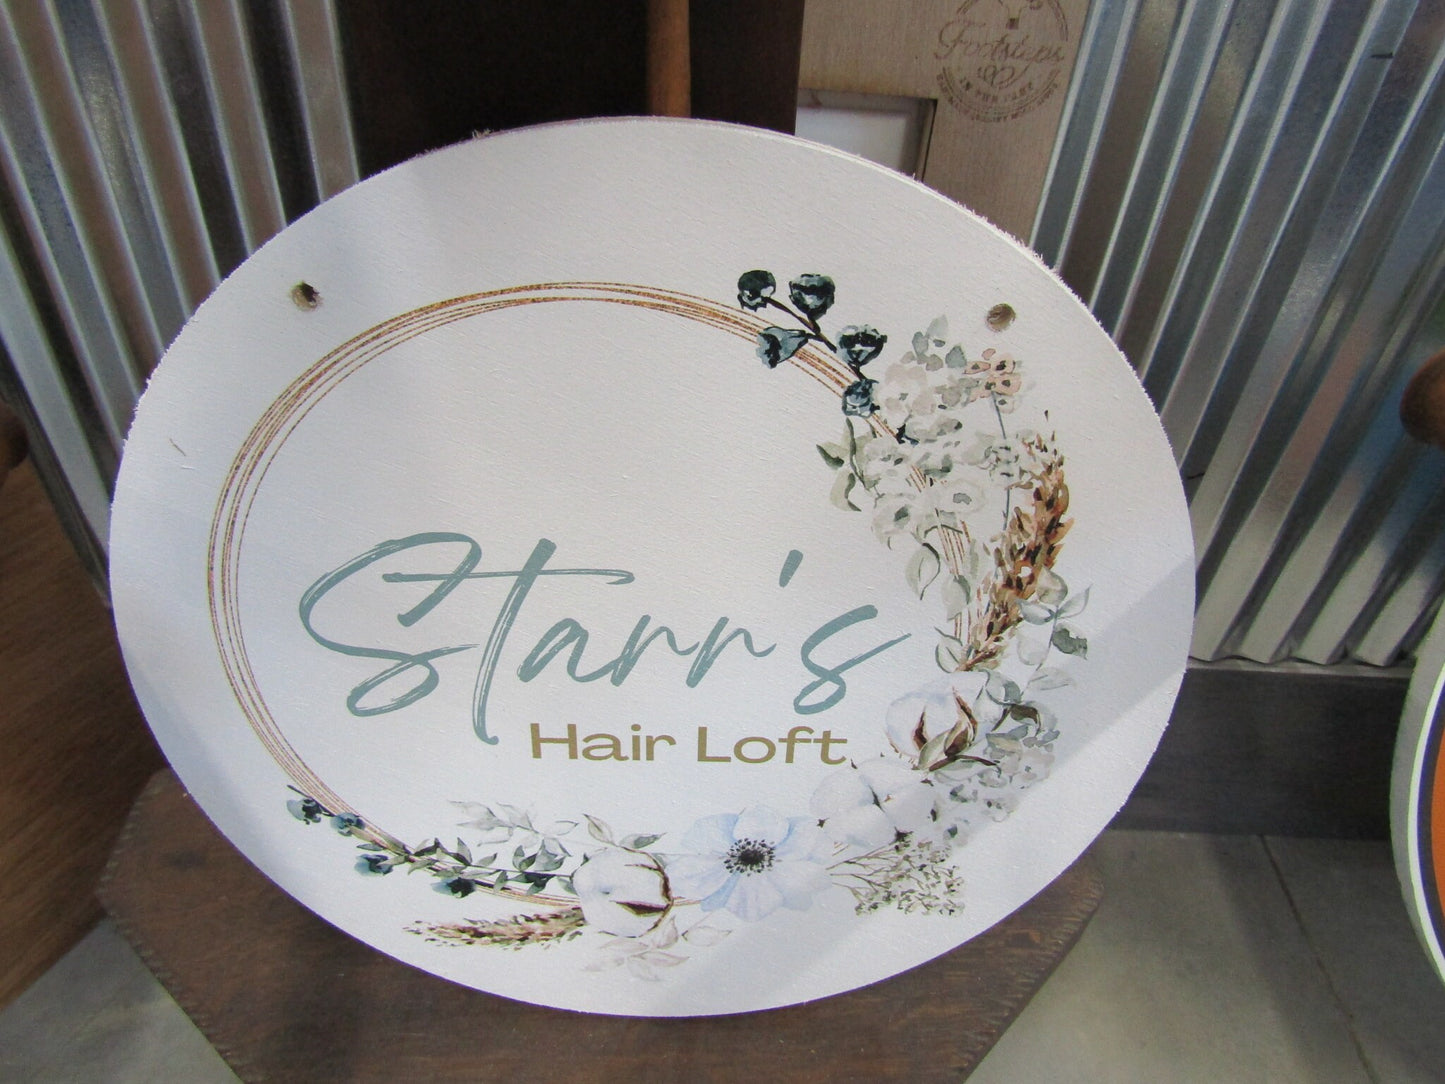 Custom Hairstylist Doorhanger Lightweight Loft Booth Sign Floral Border Printed In Color Your Logo Beauticain Salon Sign Commerical Signage